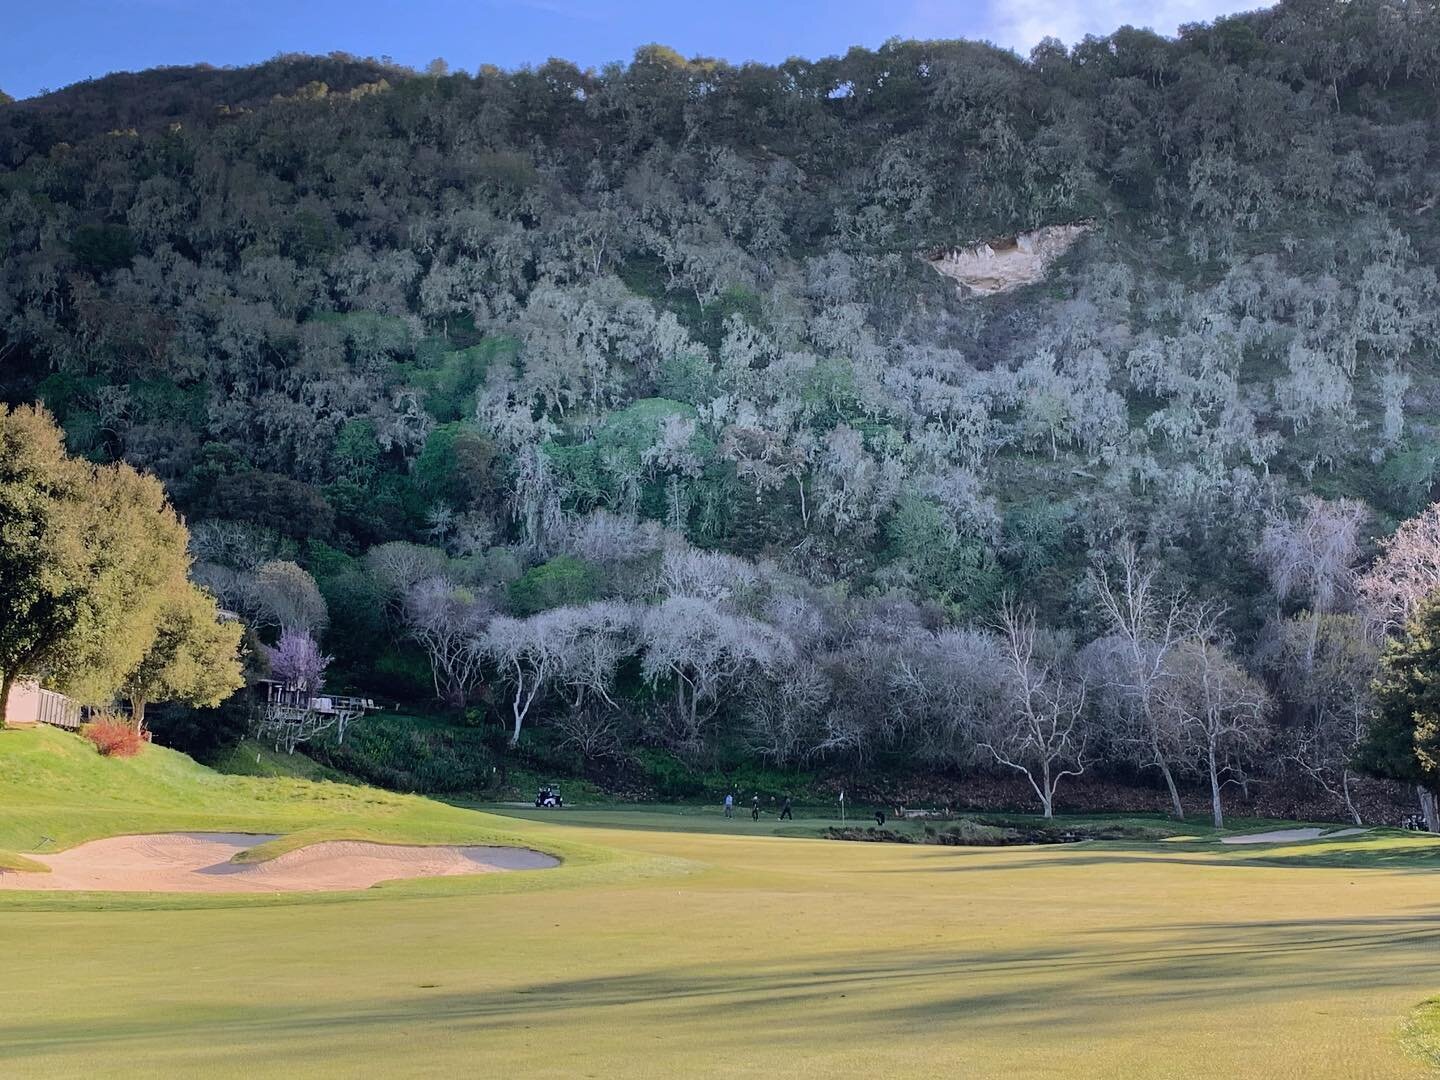 Awesome moody backdrop to this hole at @carmelvranch. Very fun day seeing old friends and meeting some new ones at the Northern California @gcsaa Institute meeting.